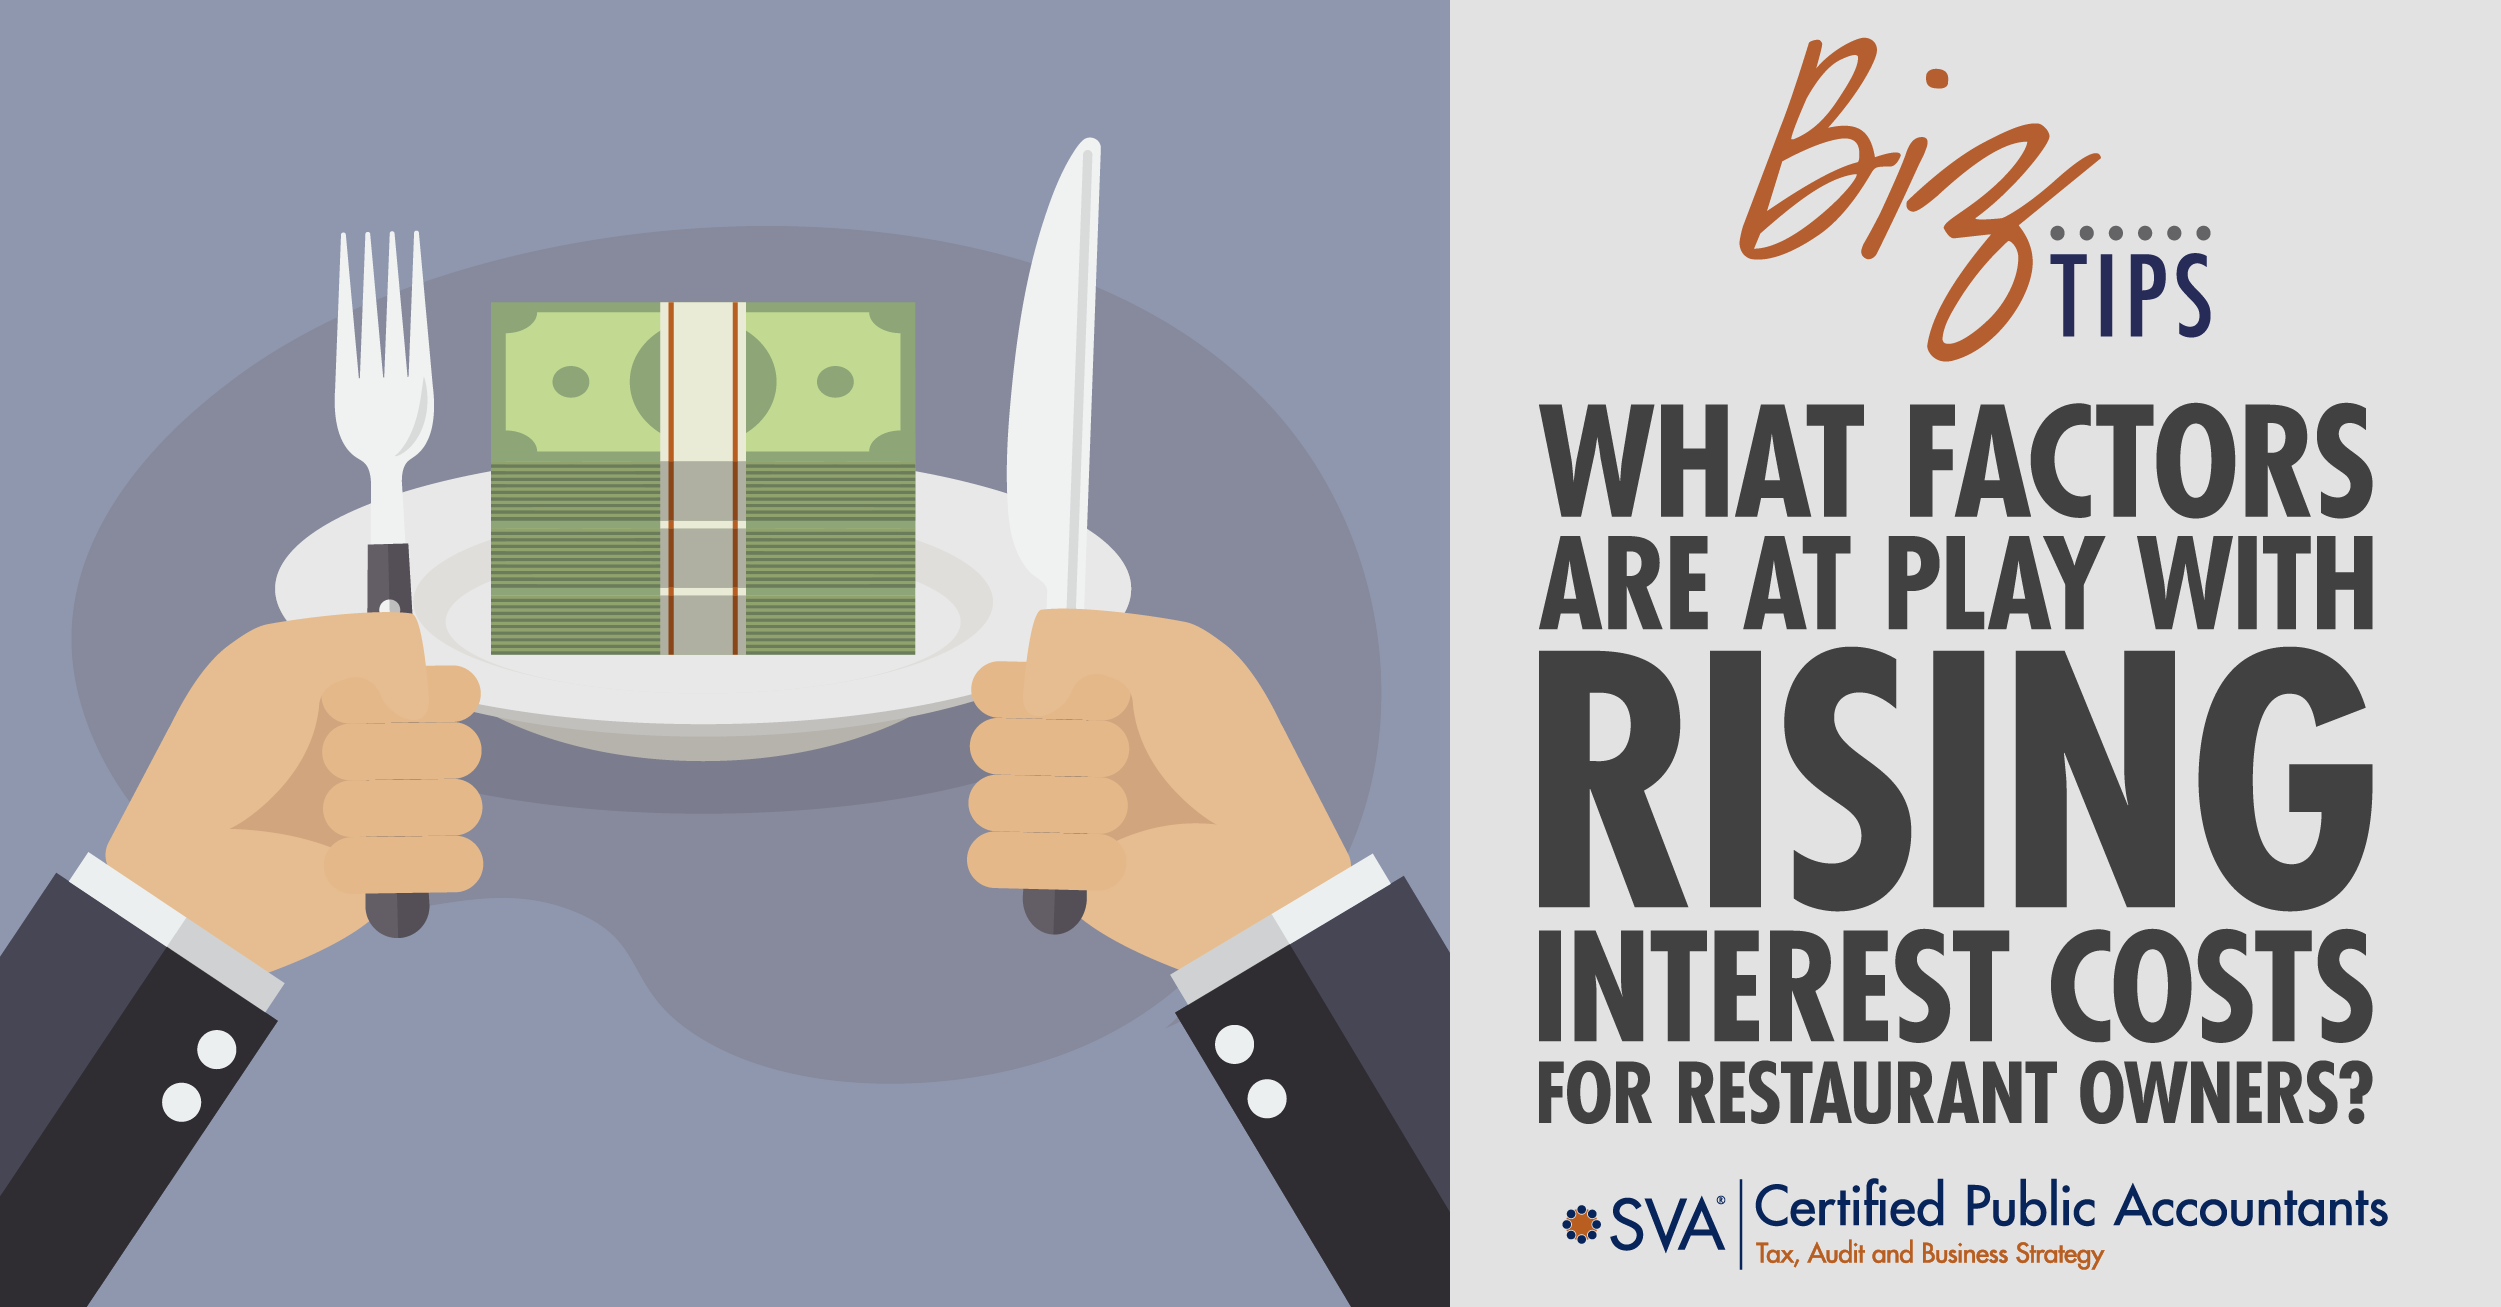 Factors With Rising Interest Costs for Restaurant Owners